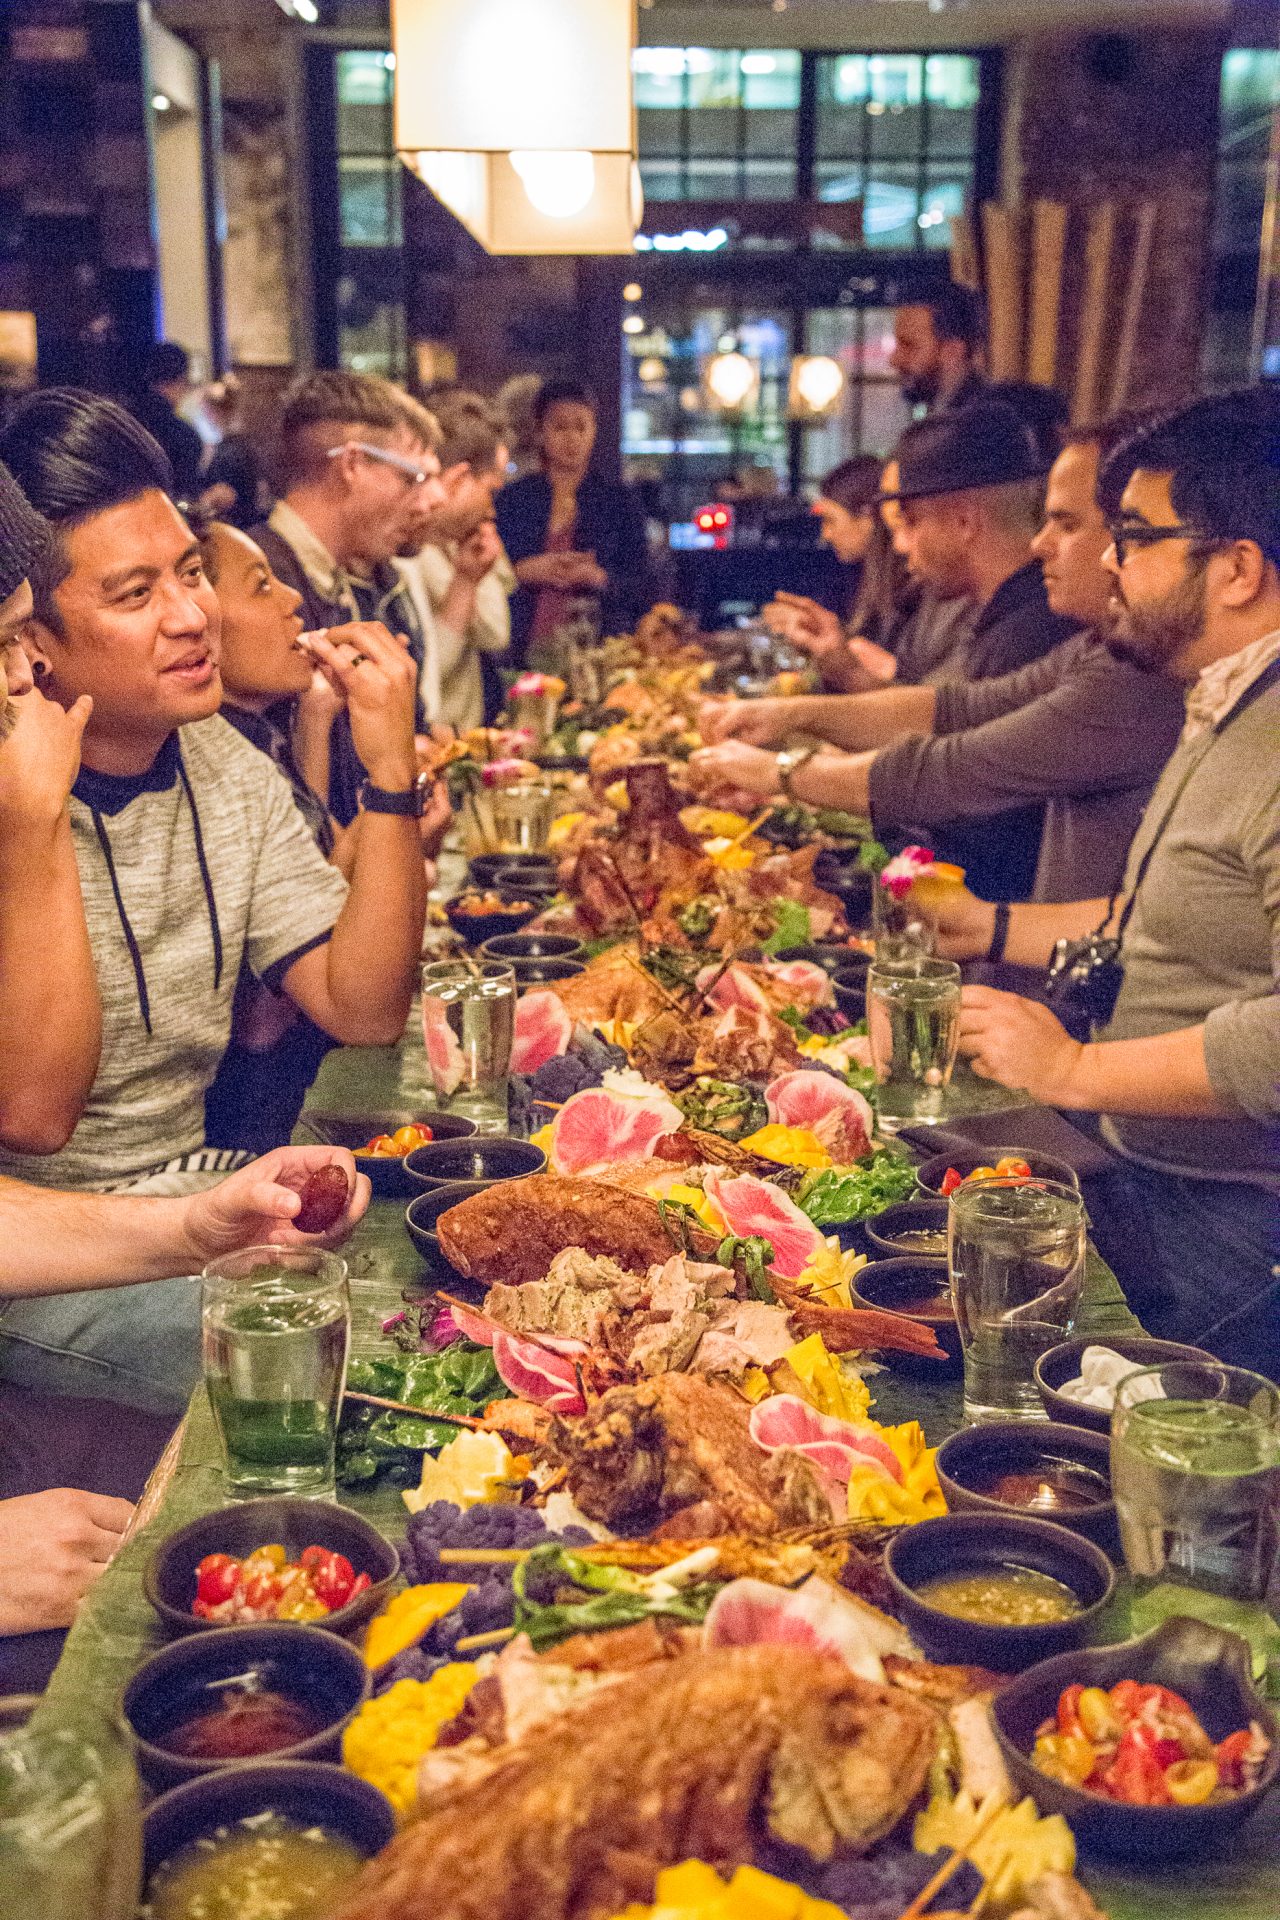 The Kamayan Feast: Head to Nashville’s Sunda New Asian for This Exotic Eating Experience